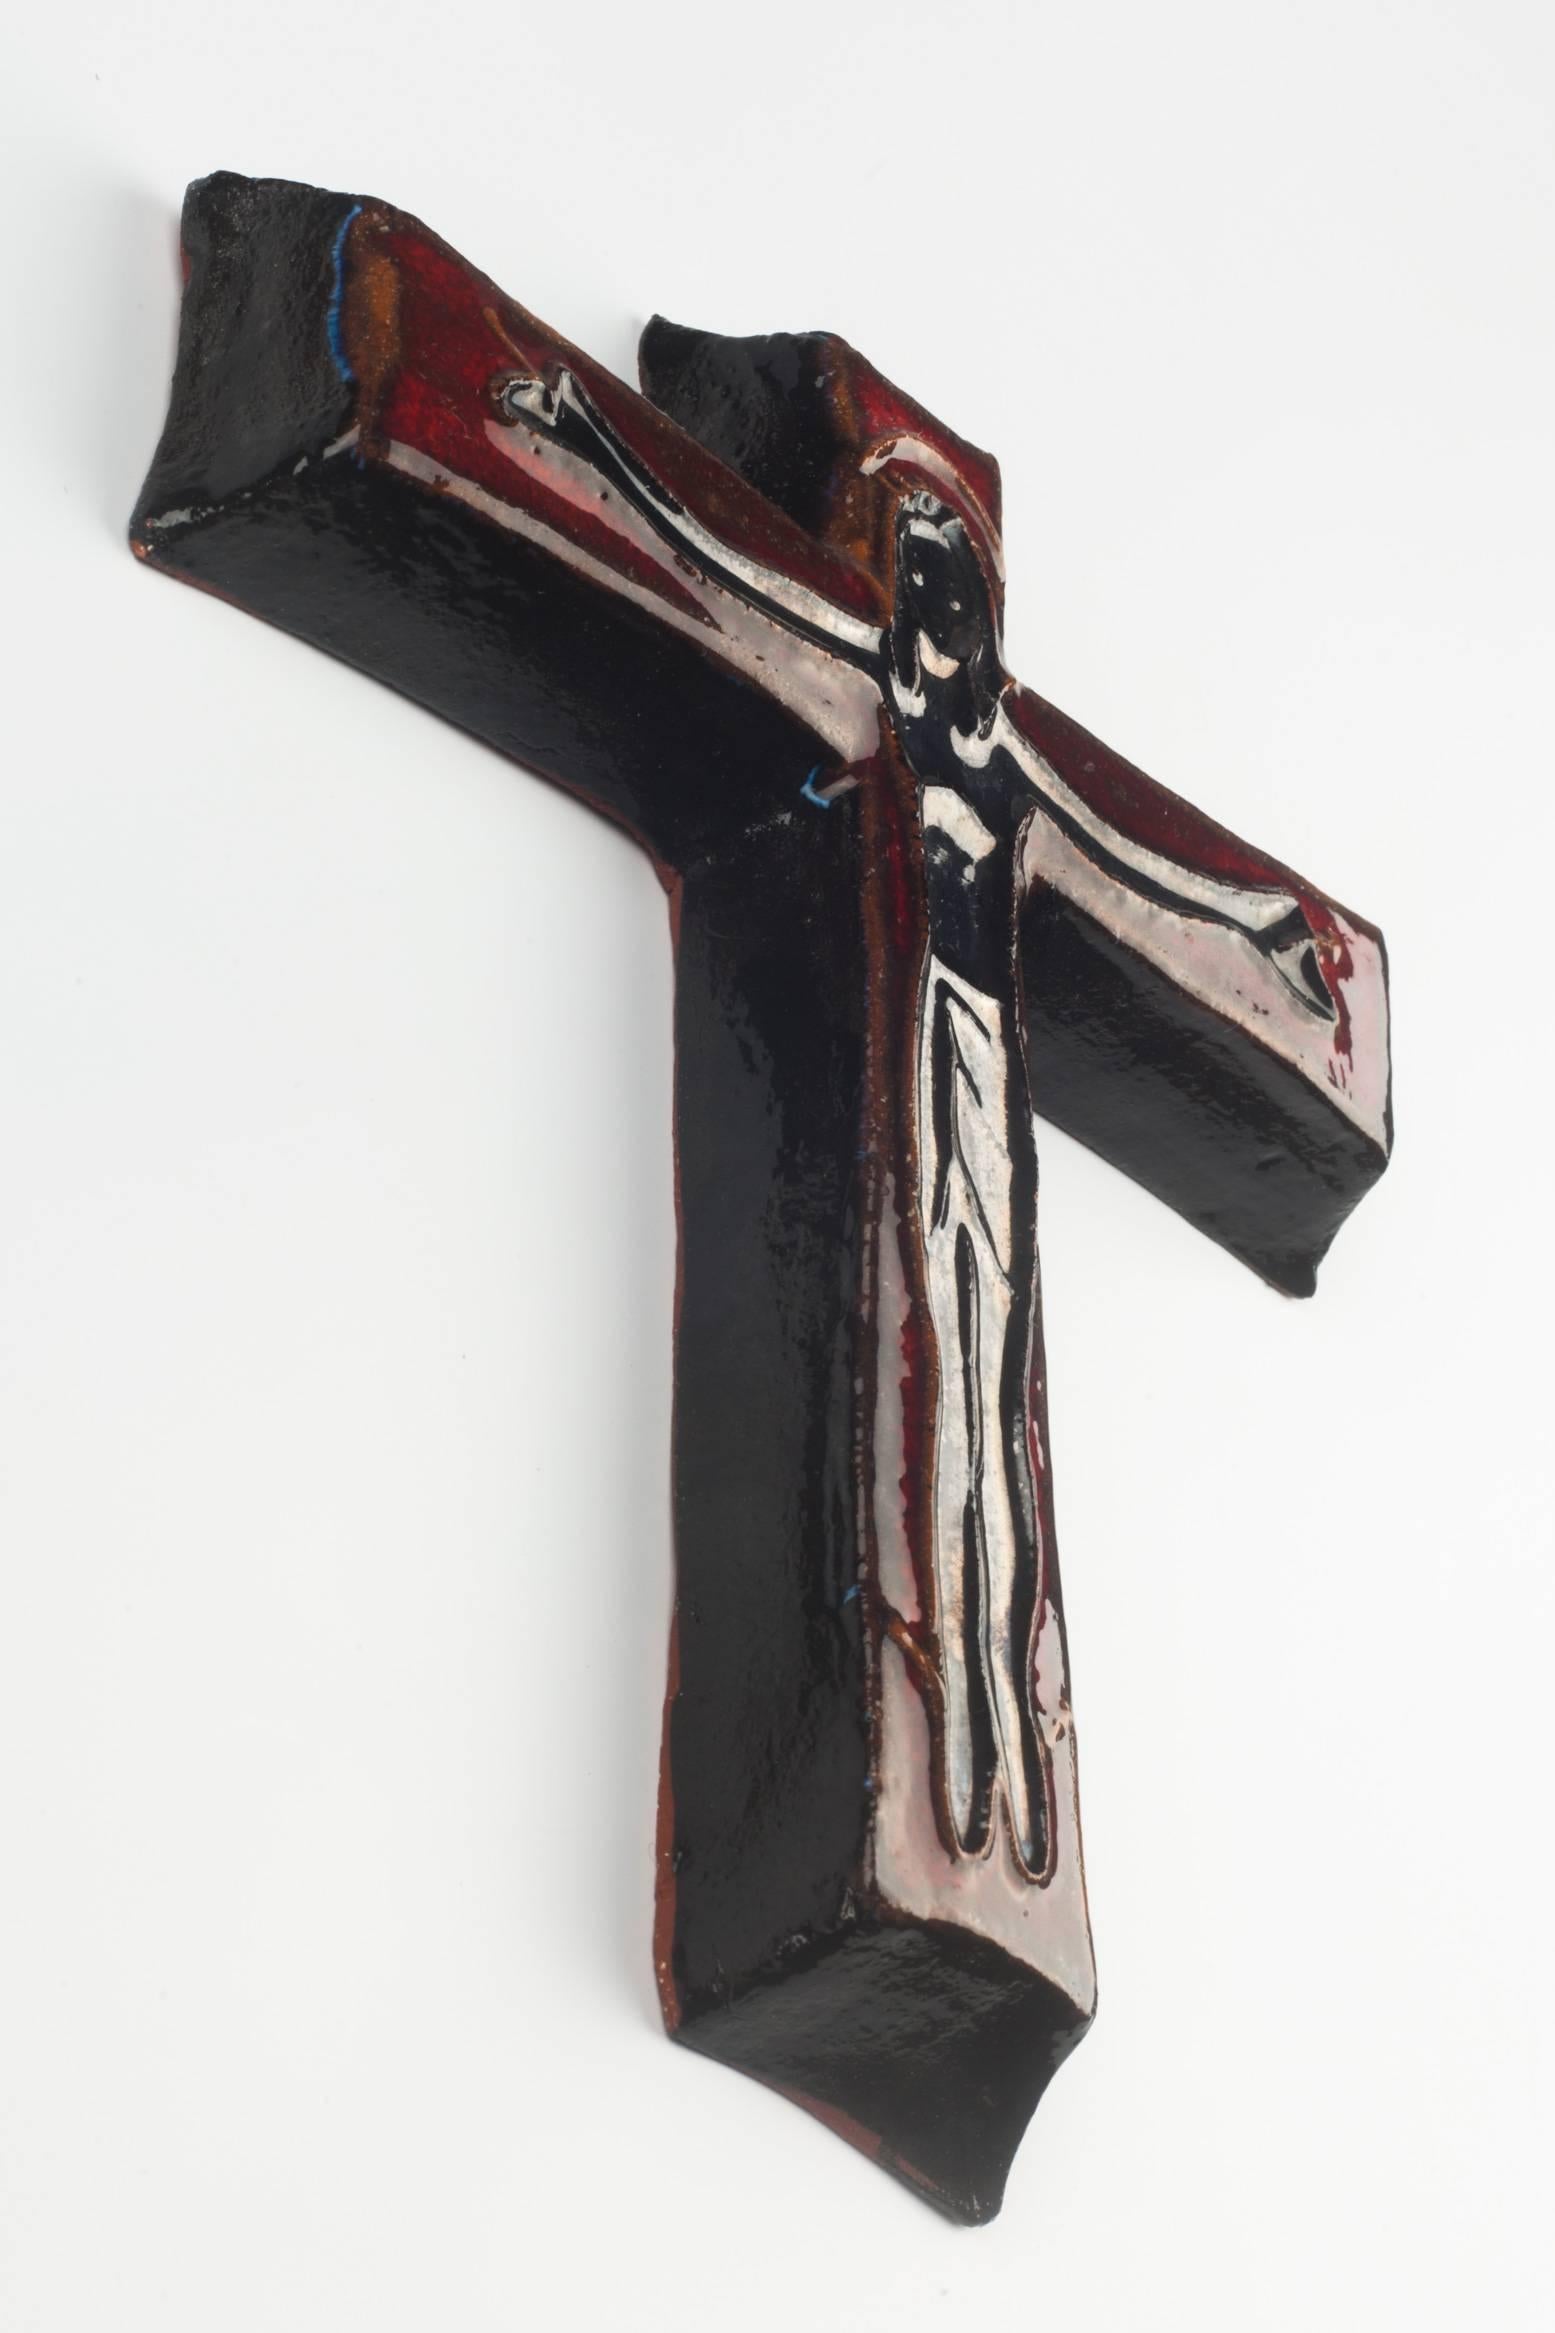 Six inch tall wall crucifix in ceramic, made in Belgium in the 1970s.
Glossy black Christ over dark red cross. Christ figure embossed in soft lines.

This piece is part of ceramic crucifix collection, all made in Belgium between the 1950s and late